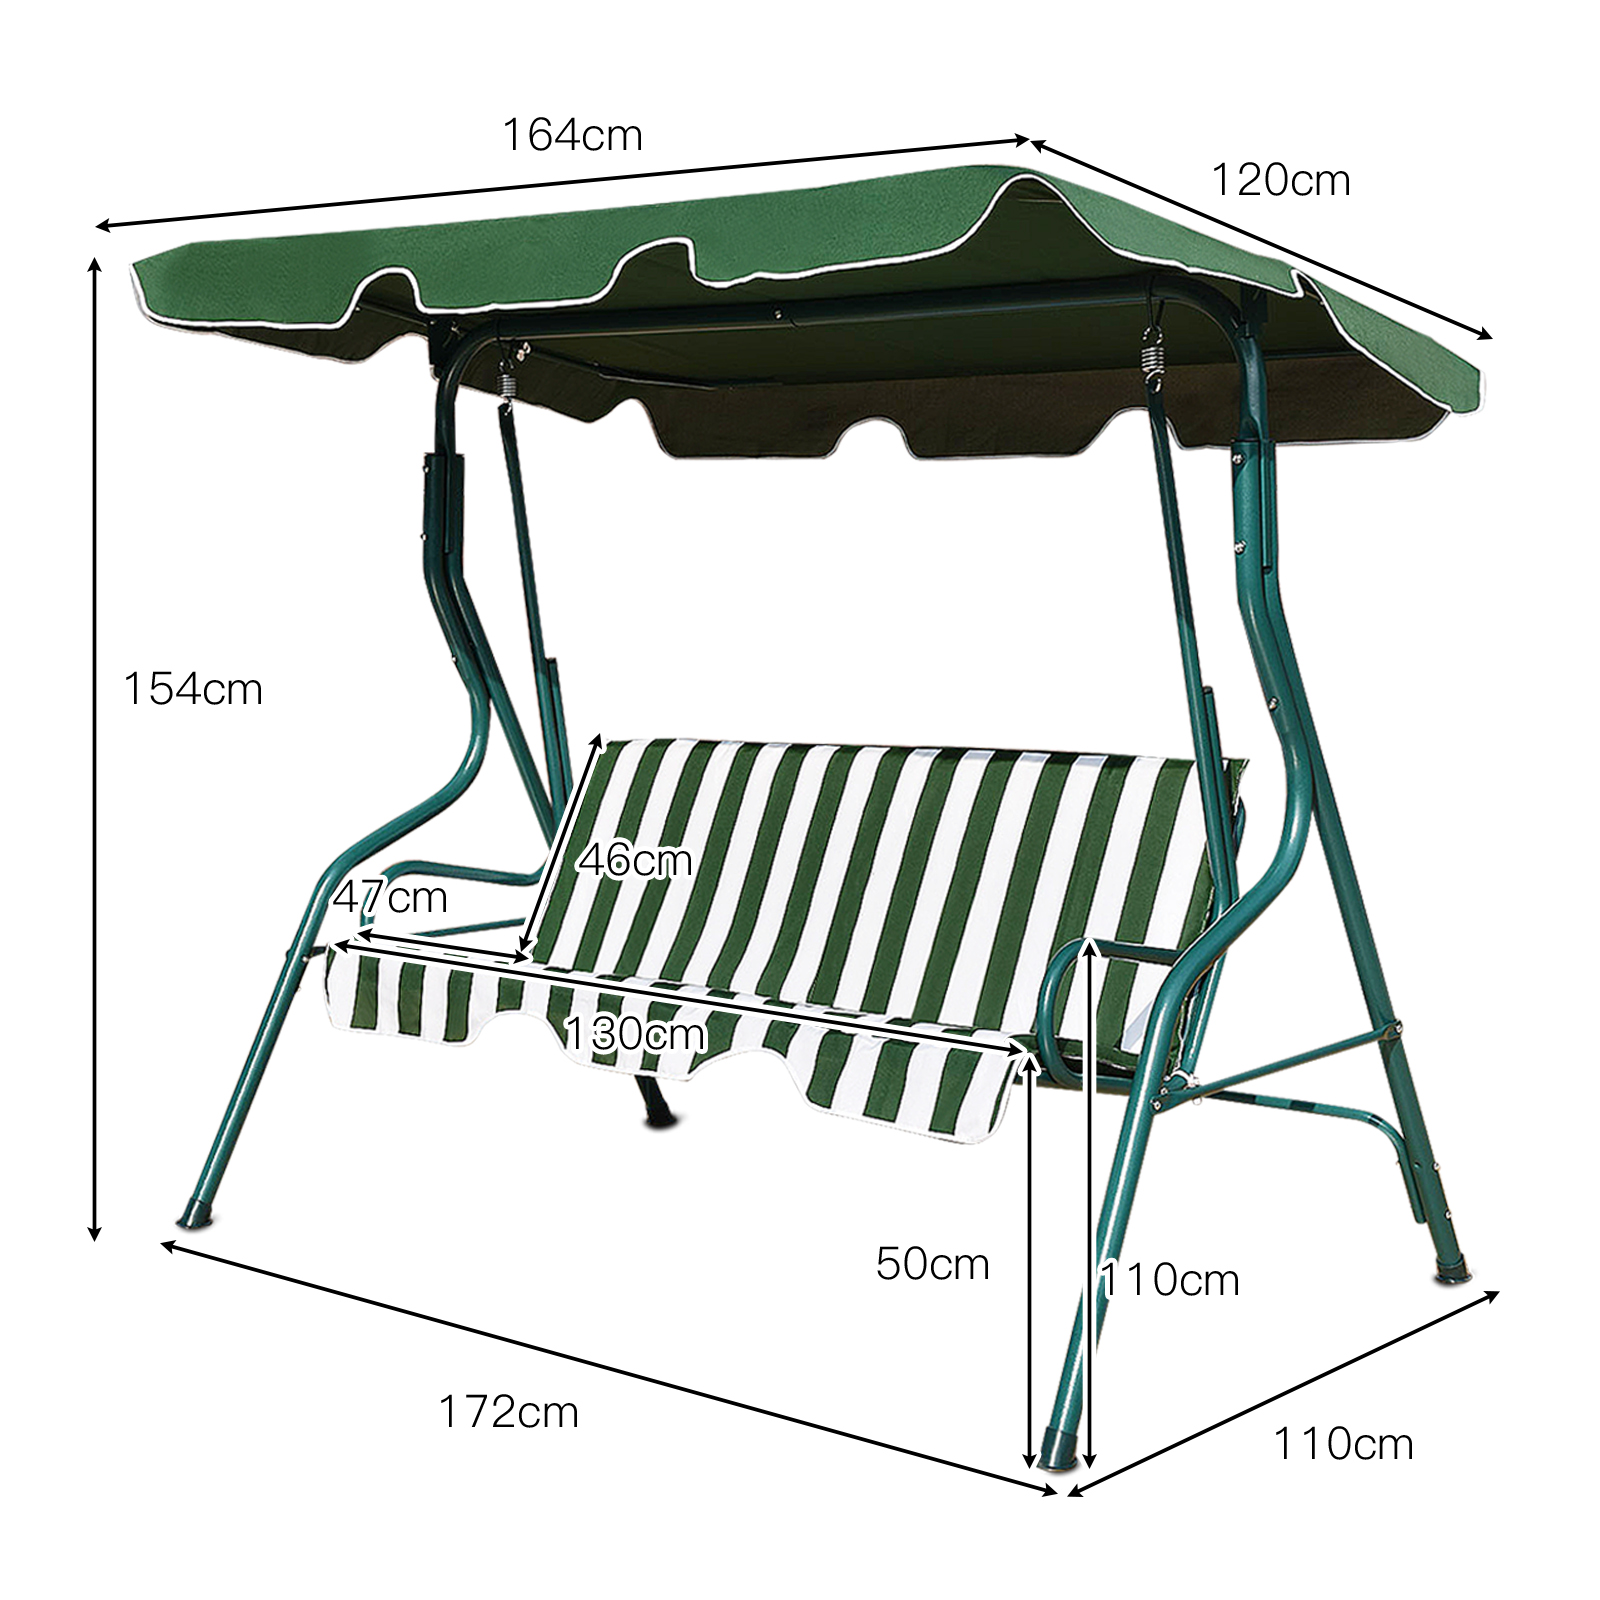 Patiojoy 3-Seats Outdoor Glider Hammock with Adjustable Waterproof Canopy Aluminum Frame Patio Swing Chair Green - image 4 of 10